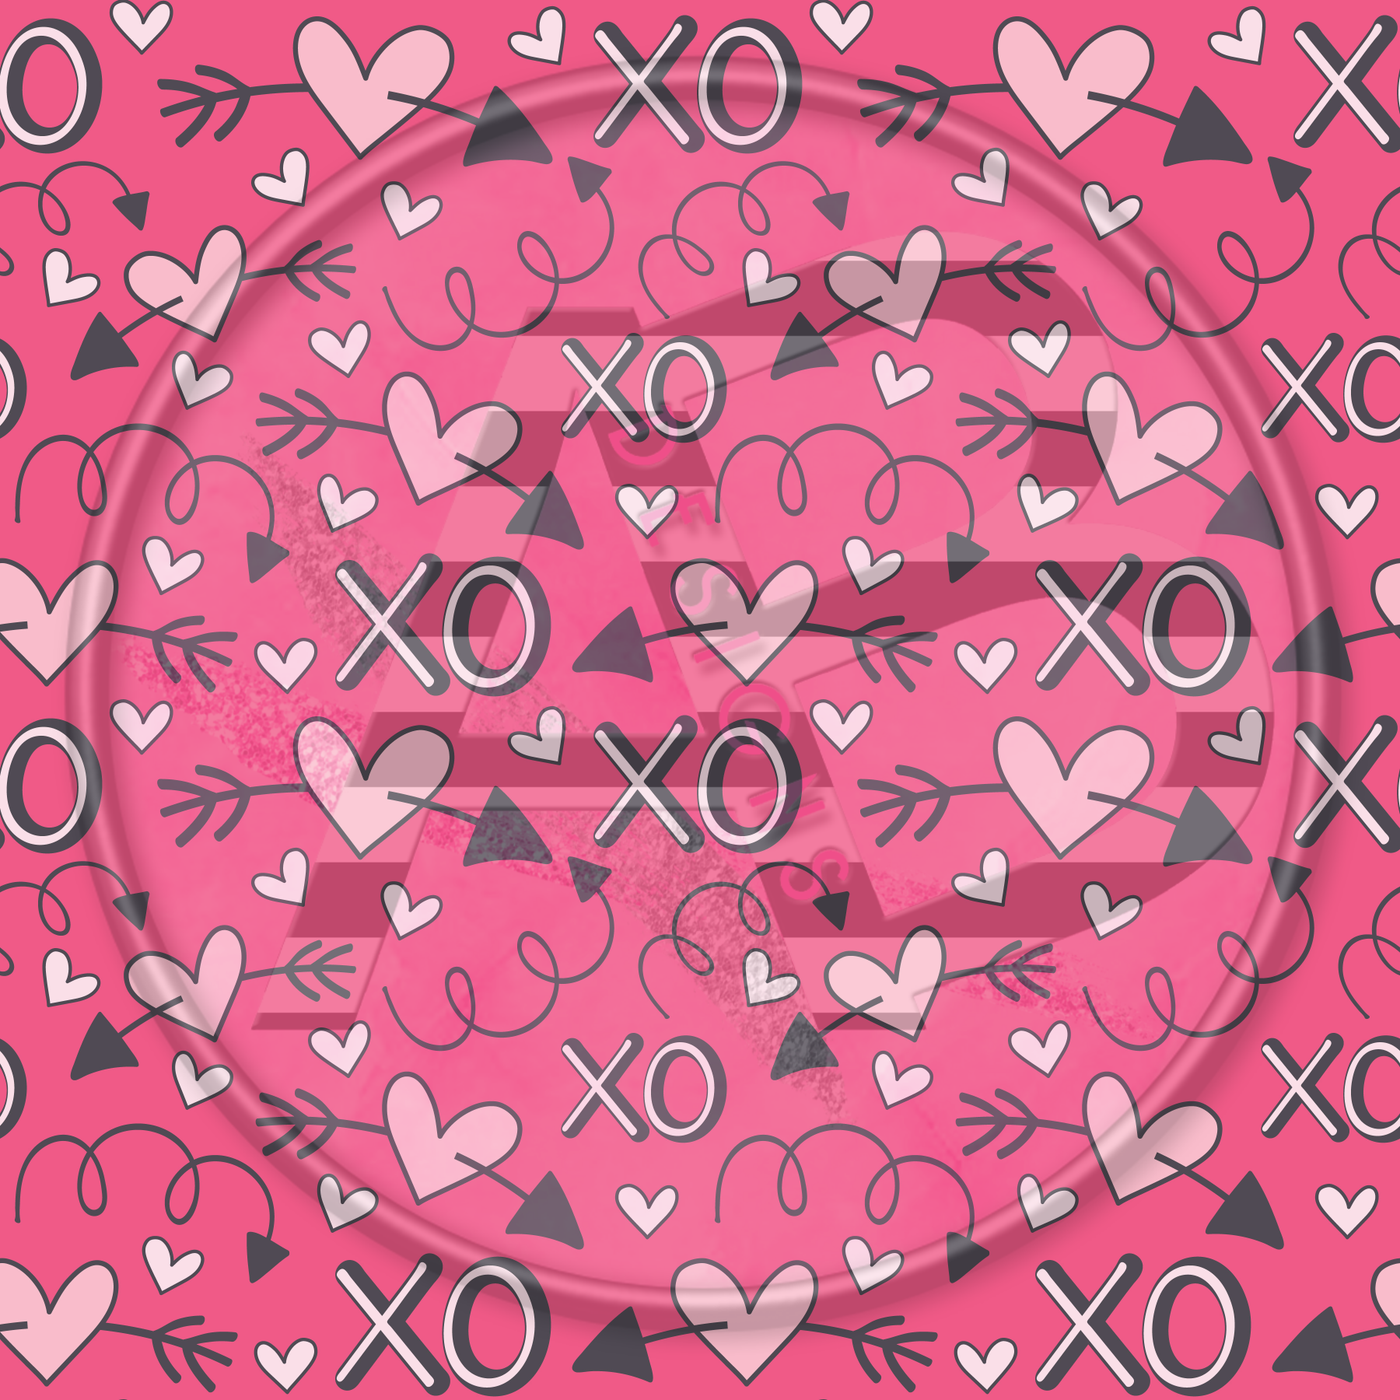 Adhesive Patterned Vinyl - Hearts 8